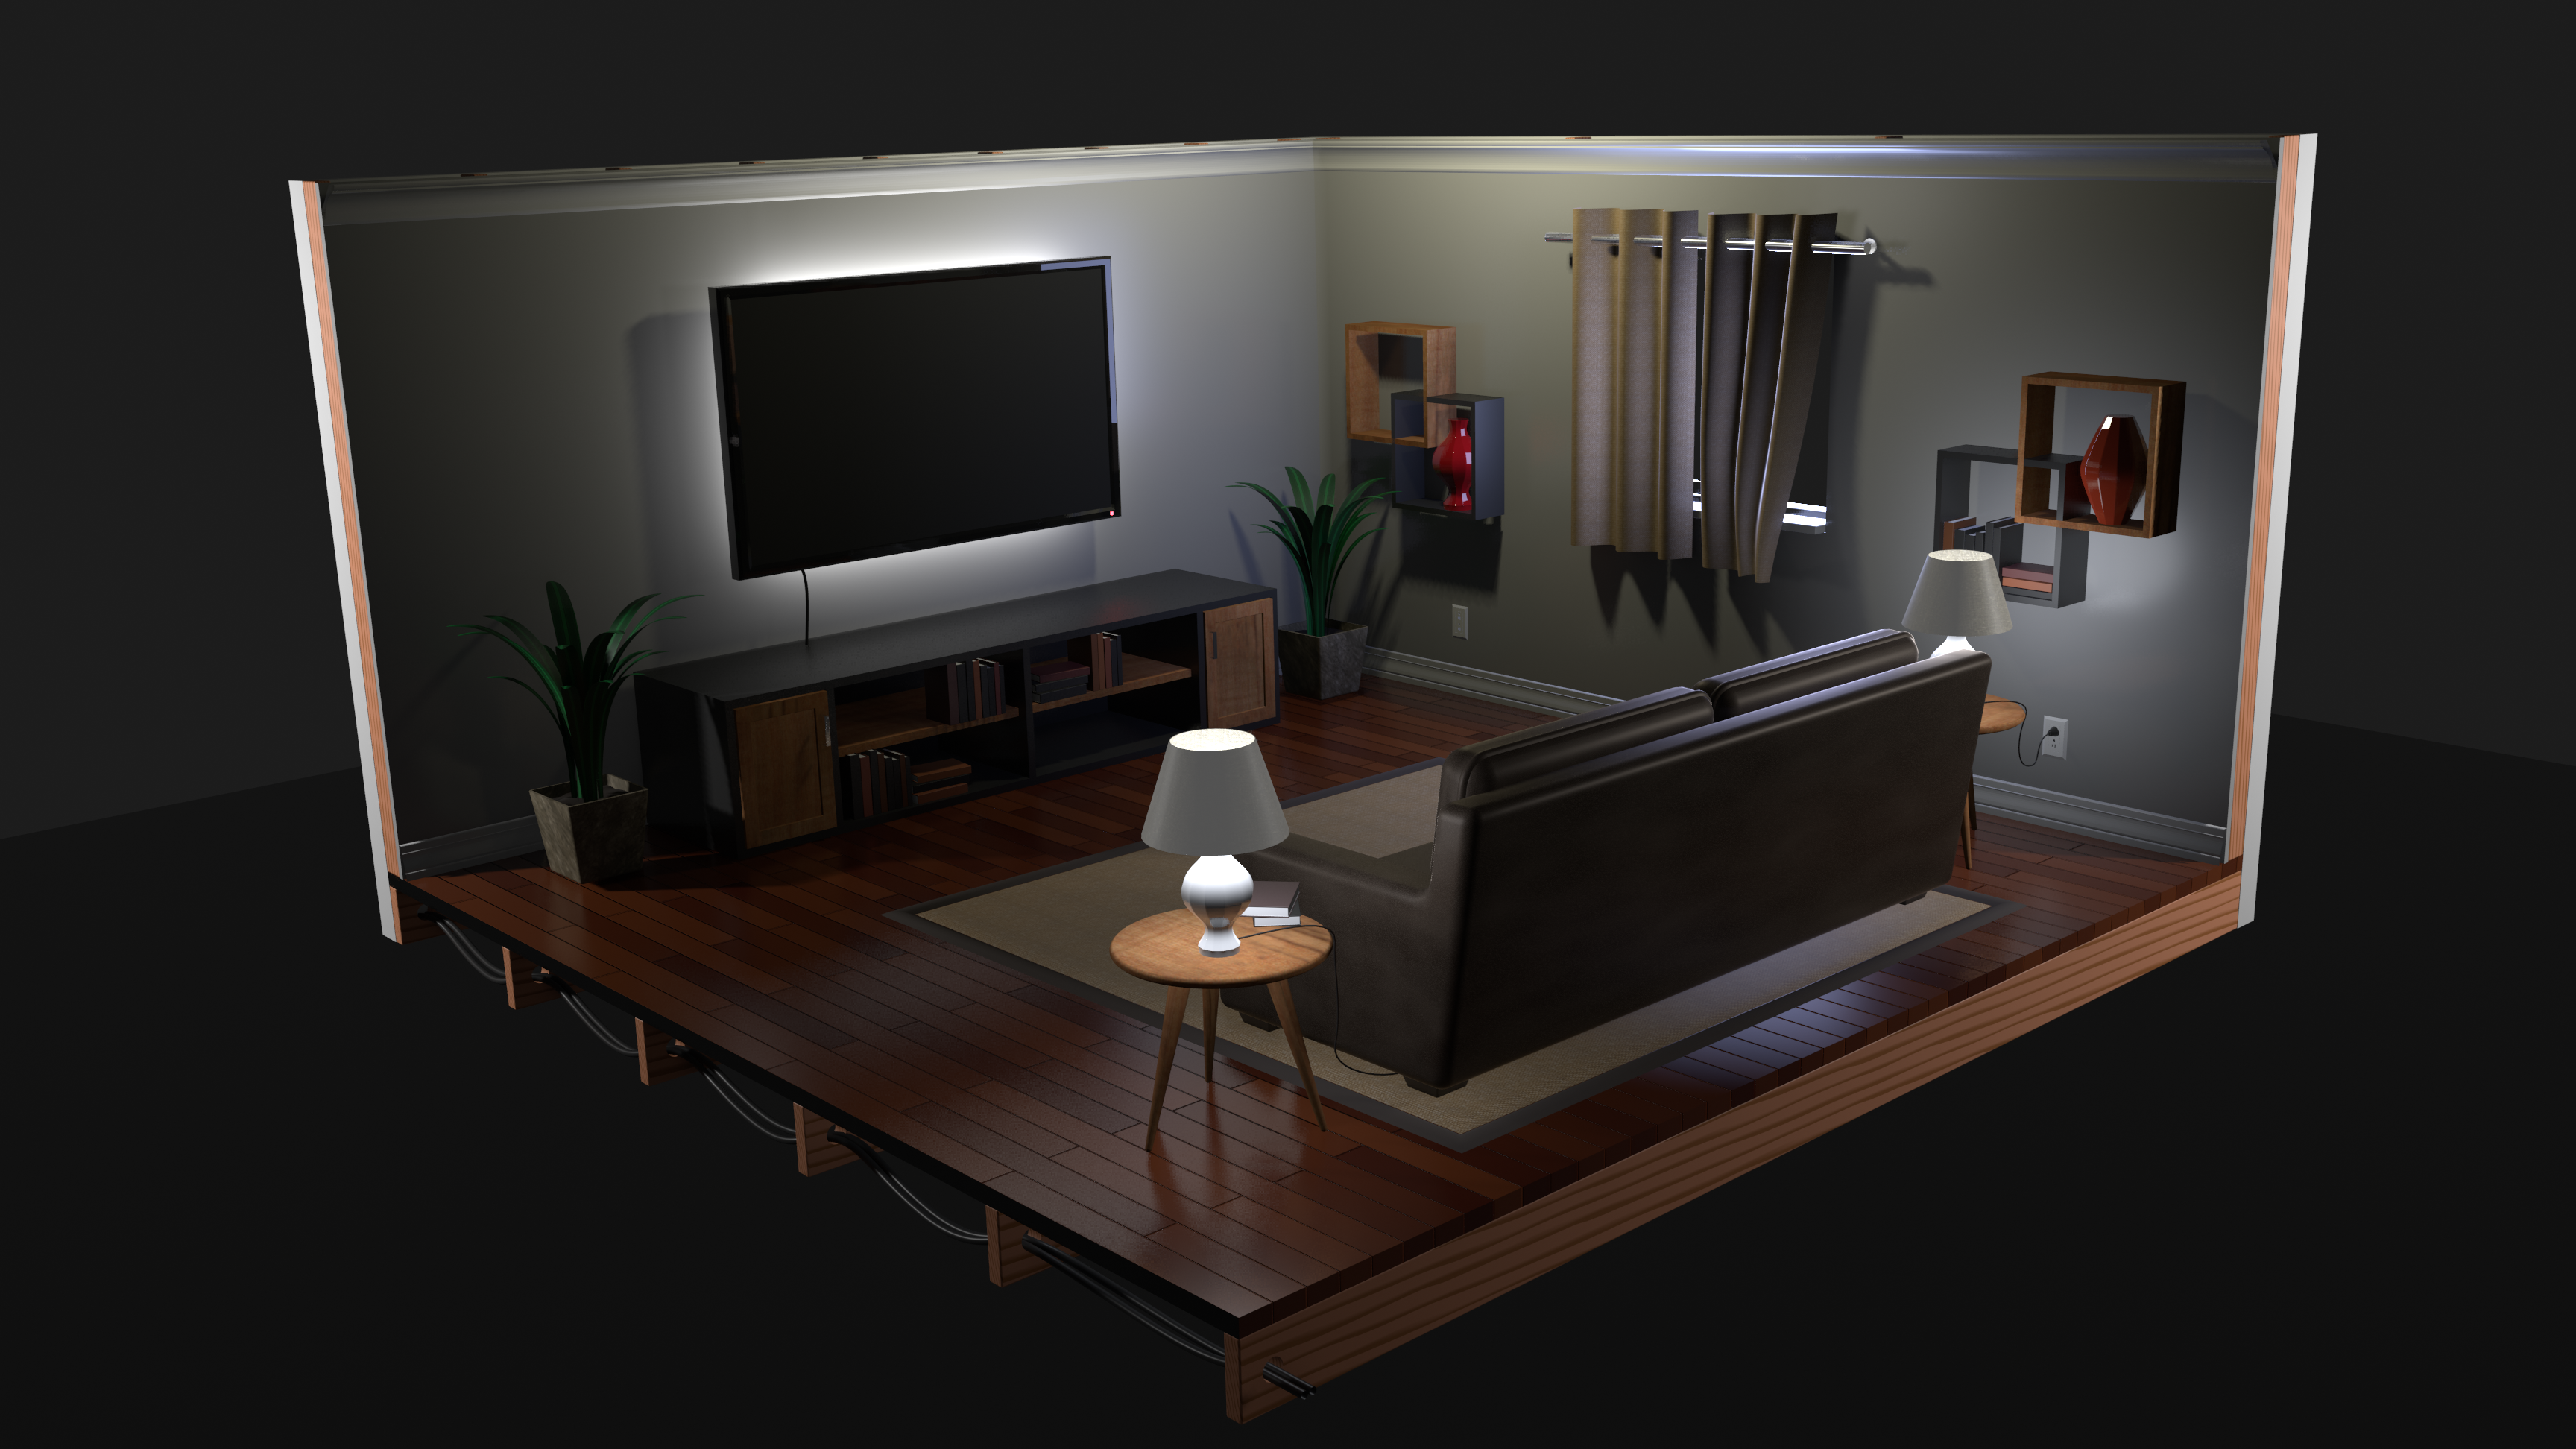 Living/TV Room Study preview image 1